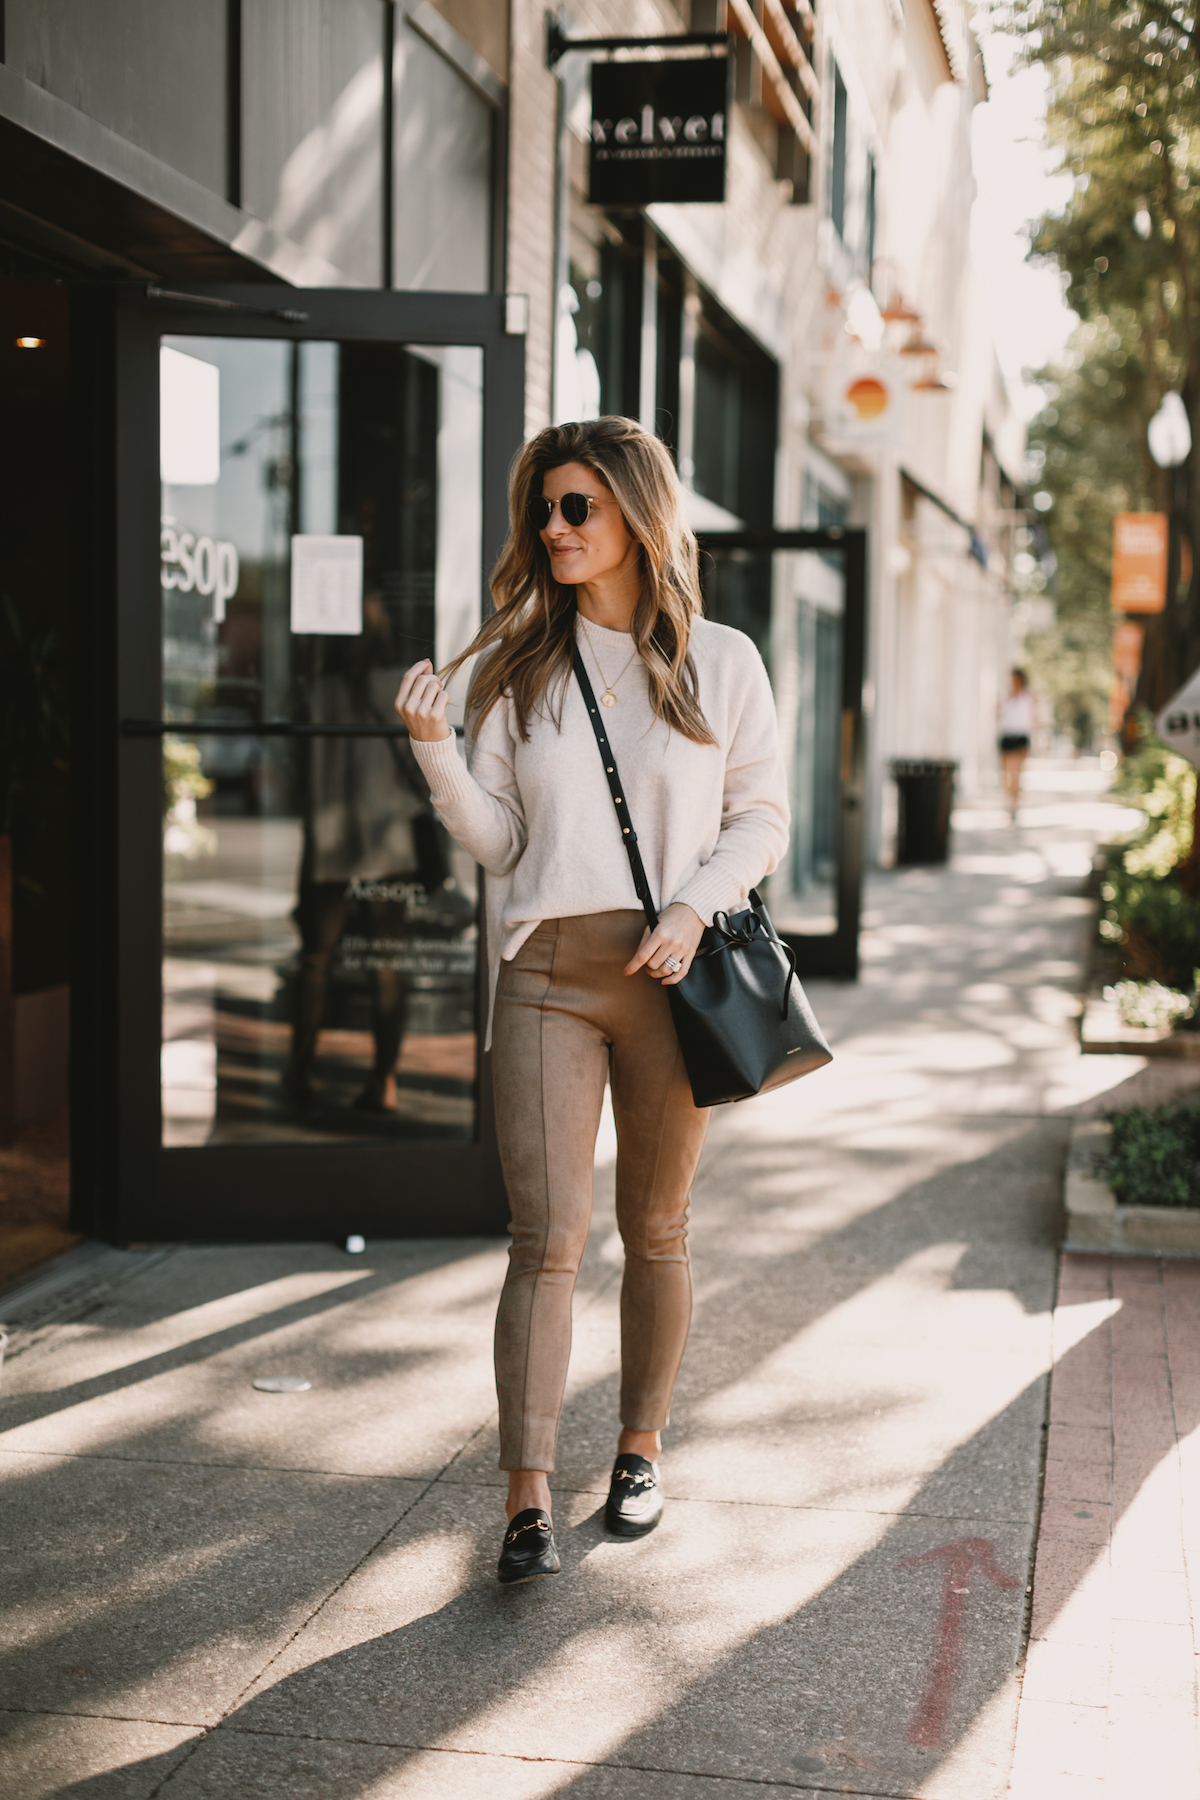 Spanx's Chic Suede Leggings Are 'Very Flattering' & the 'Best